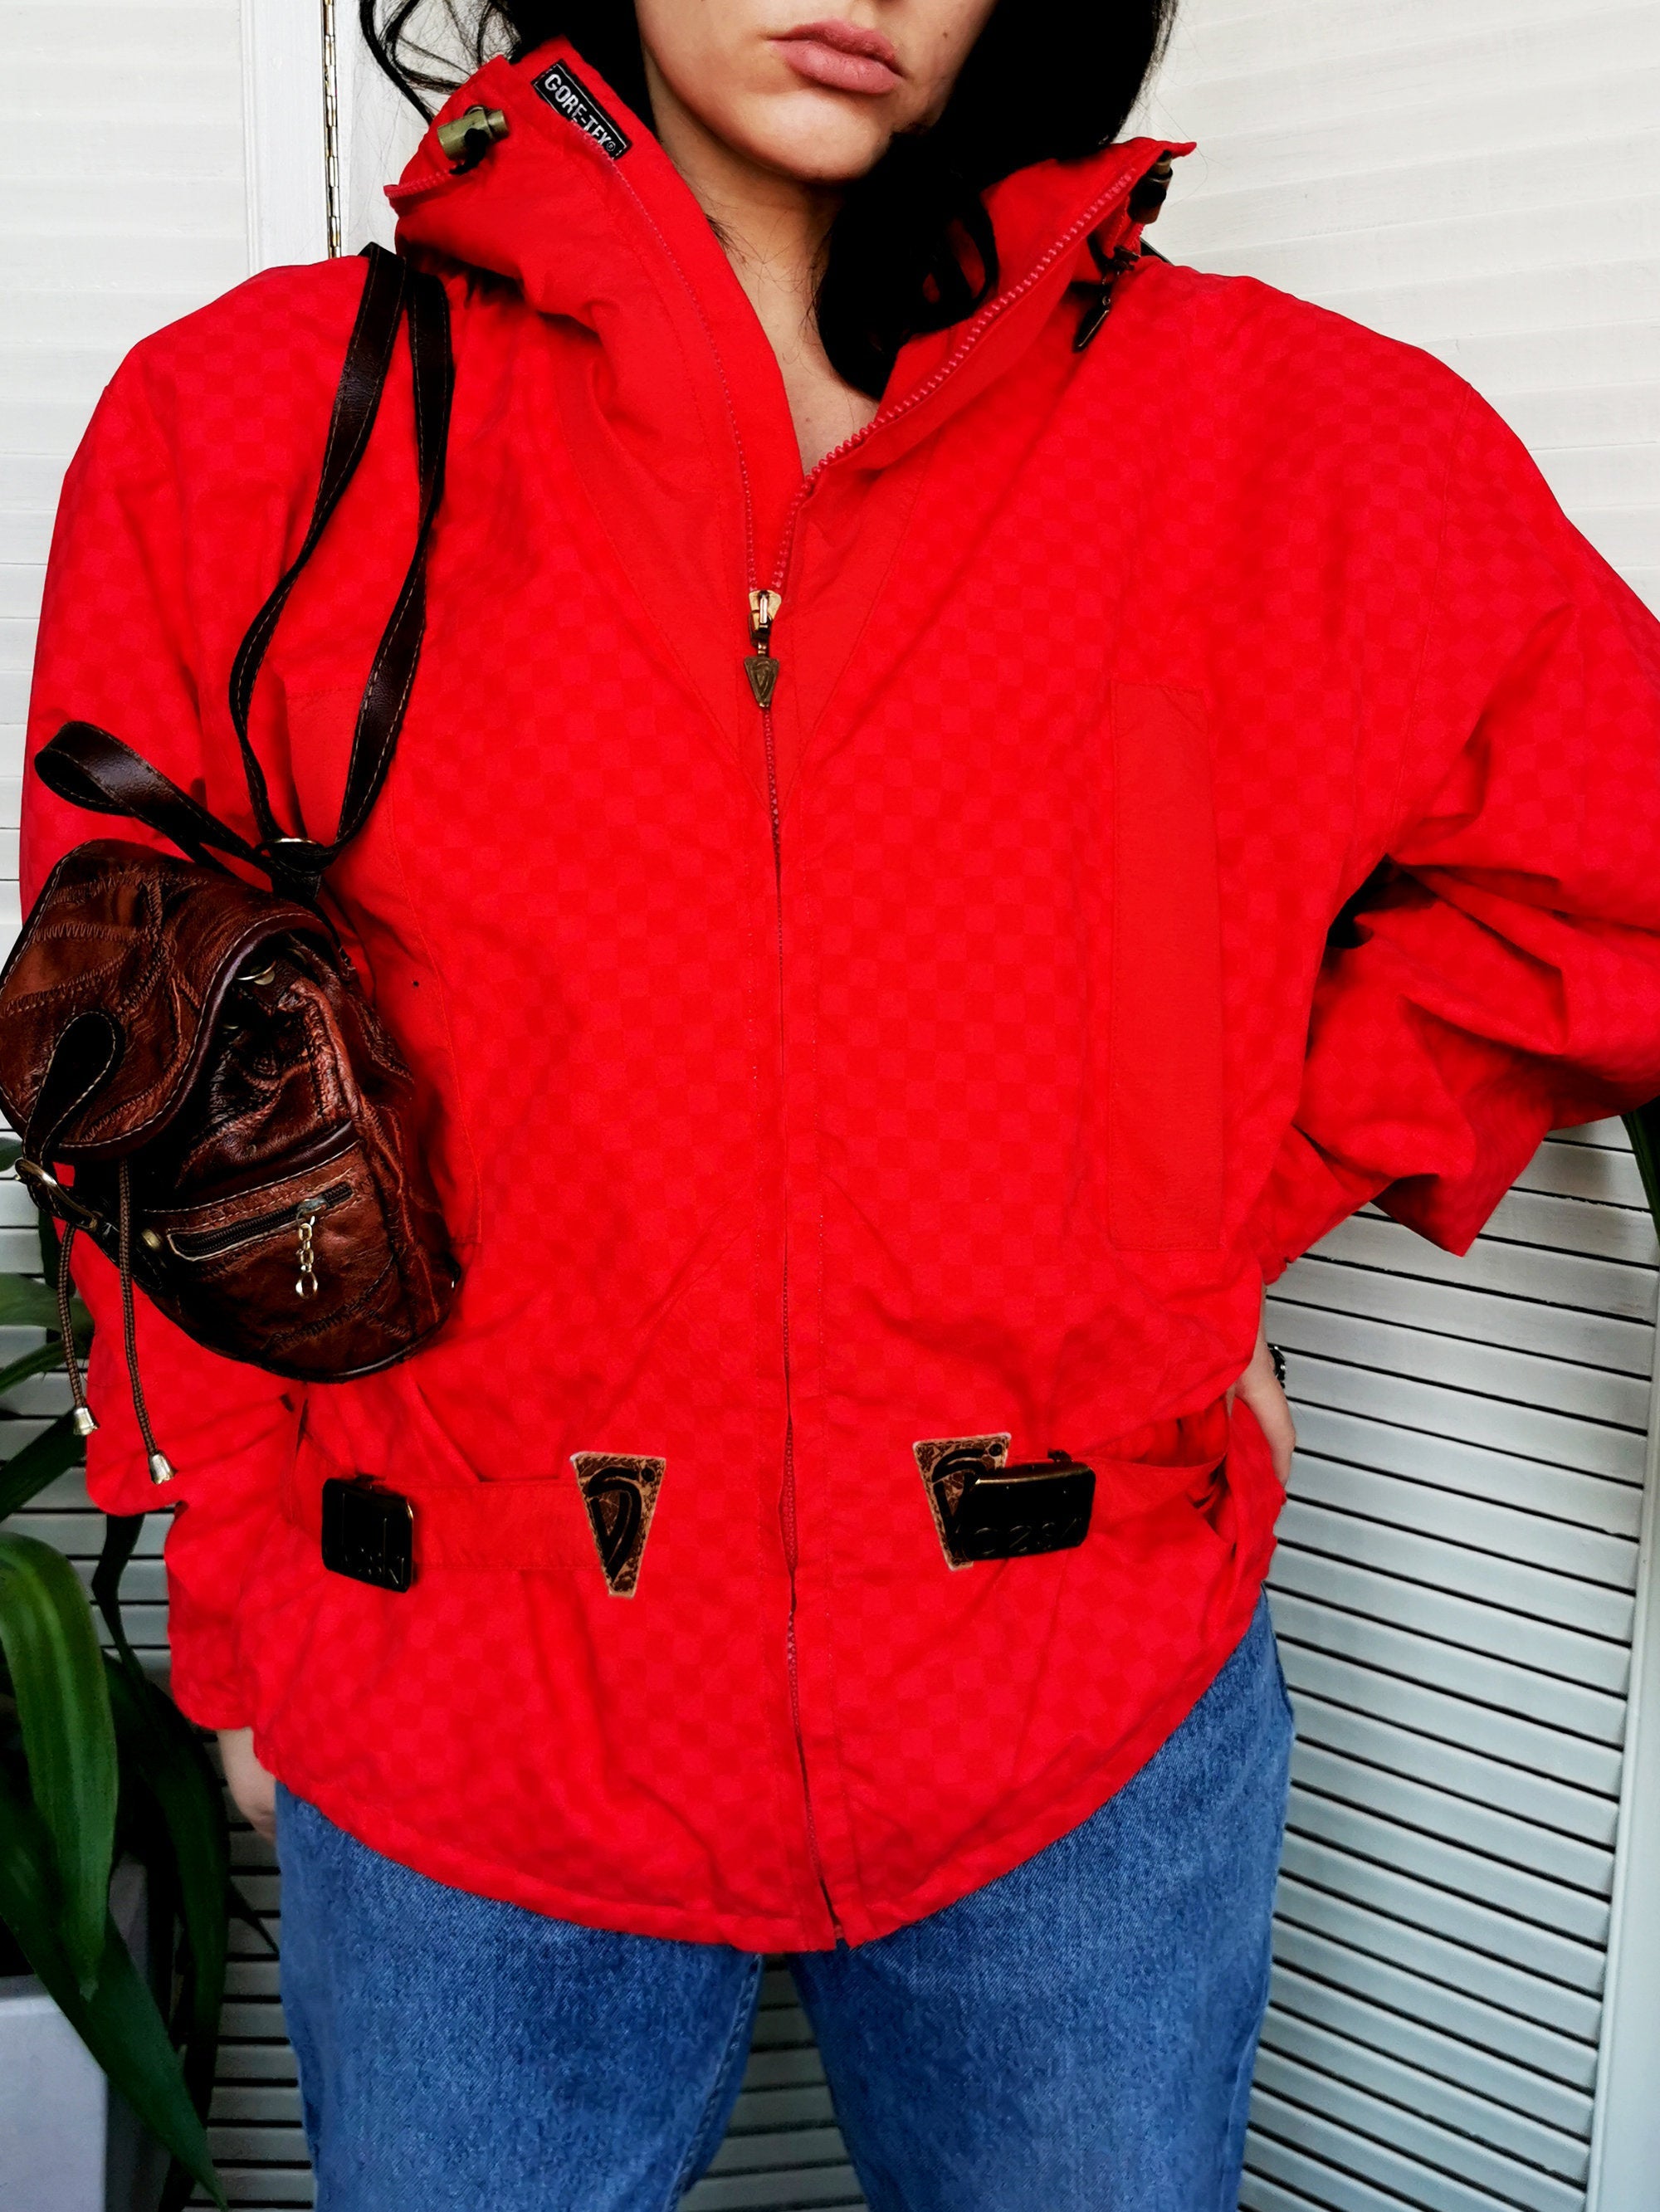 Vintage 90s red chess print hooded jacket